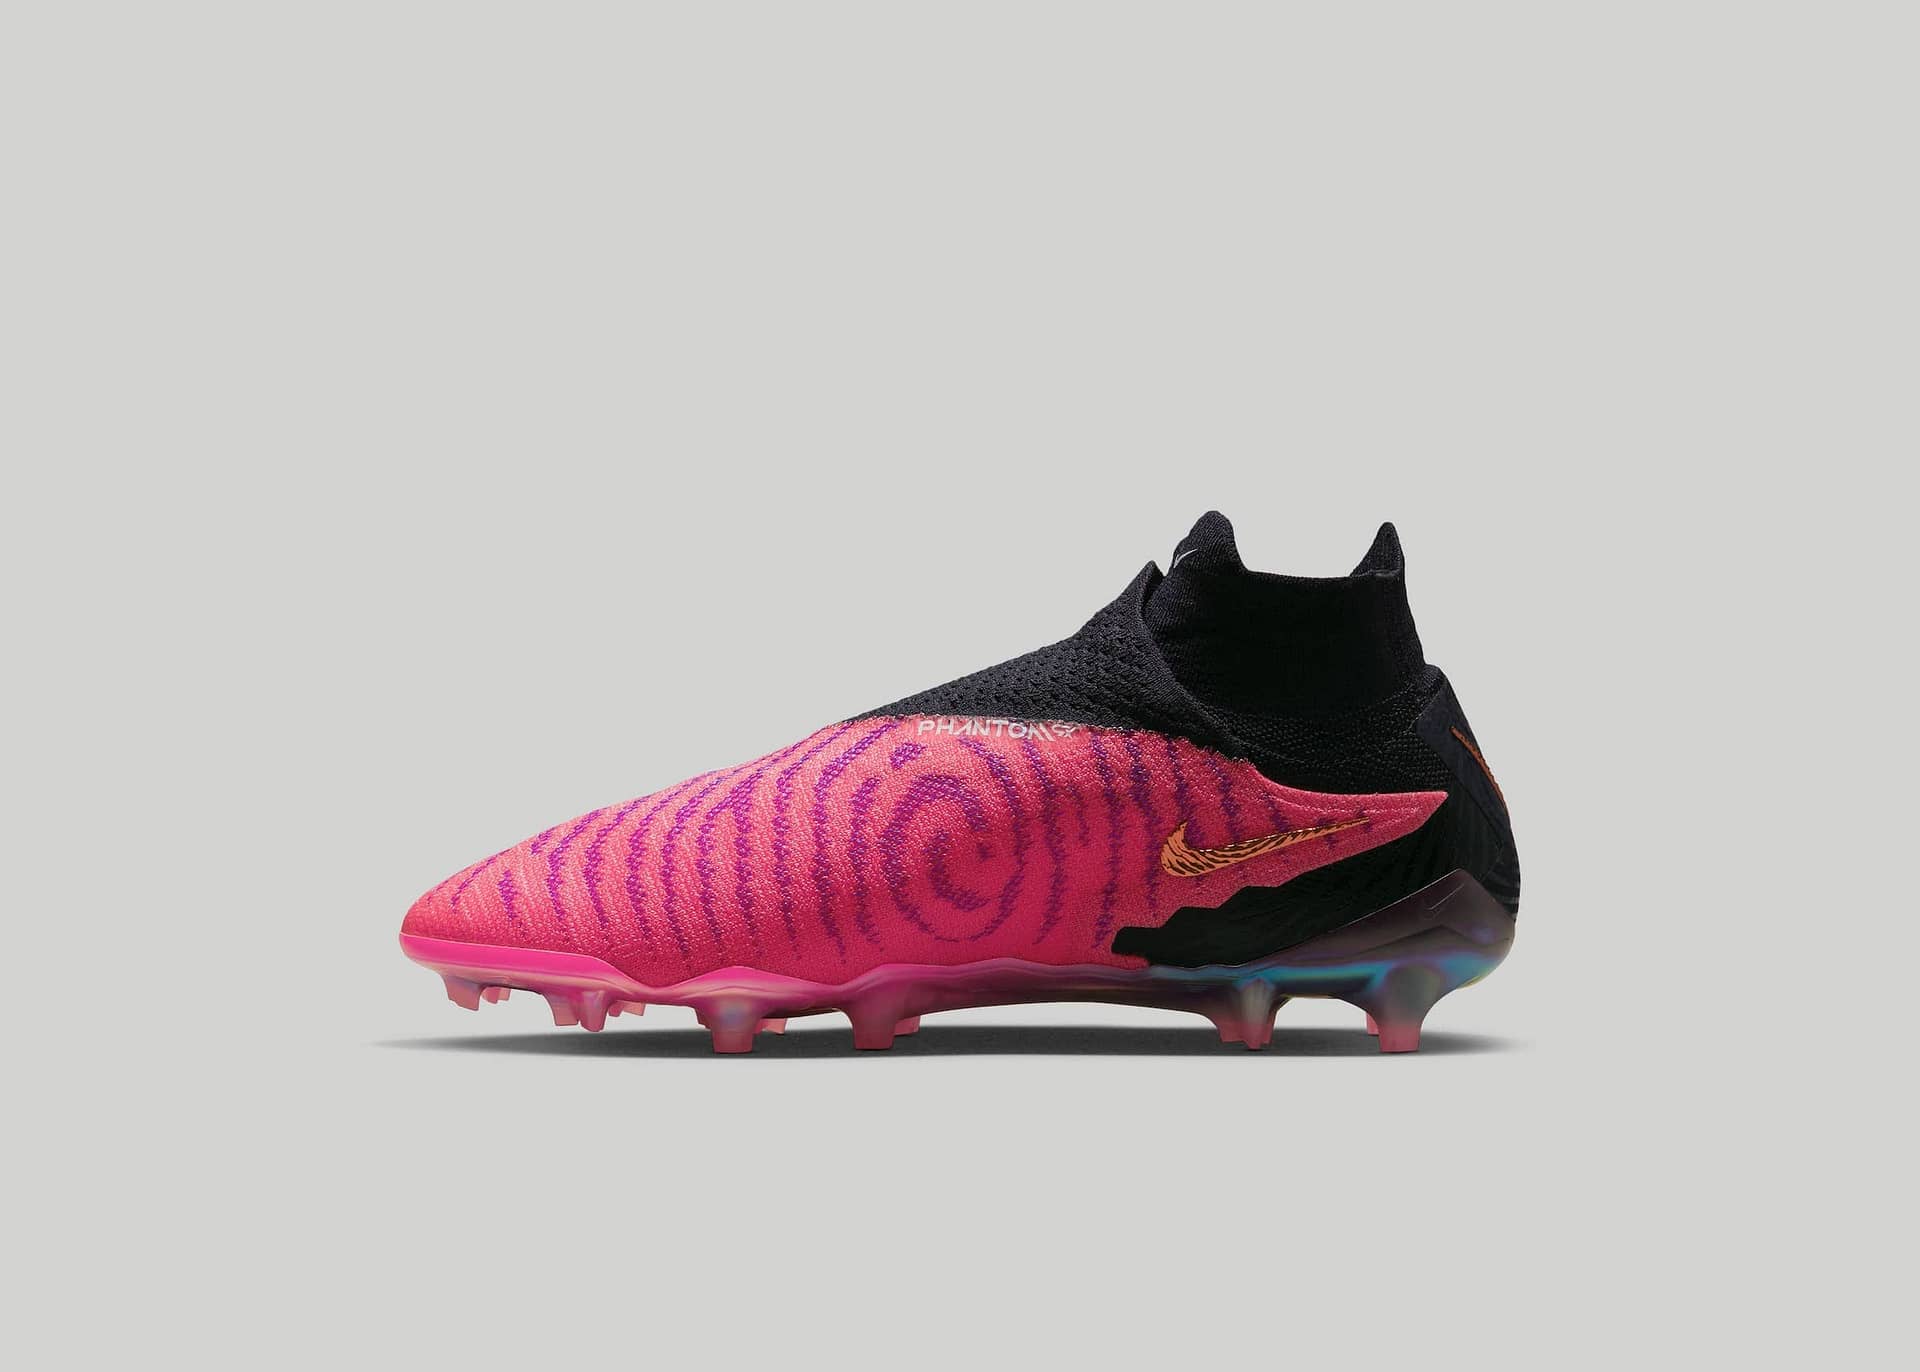 The Nike Phantom GX Takes Precision To The Next Level With Its Gripknit ...